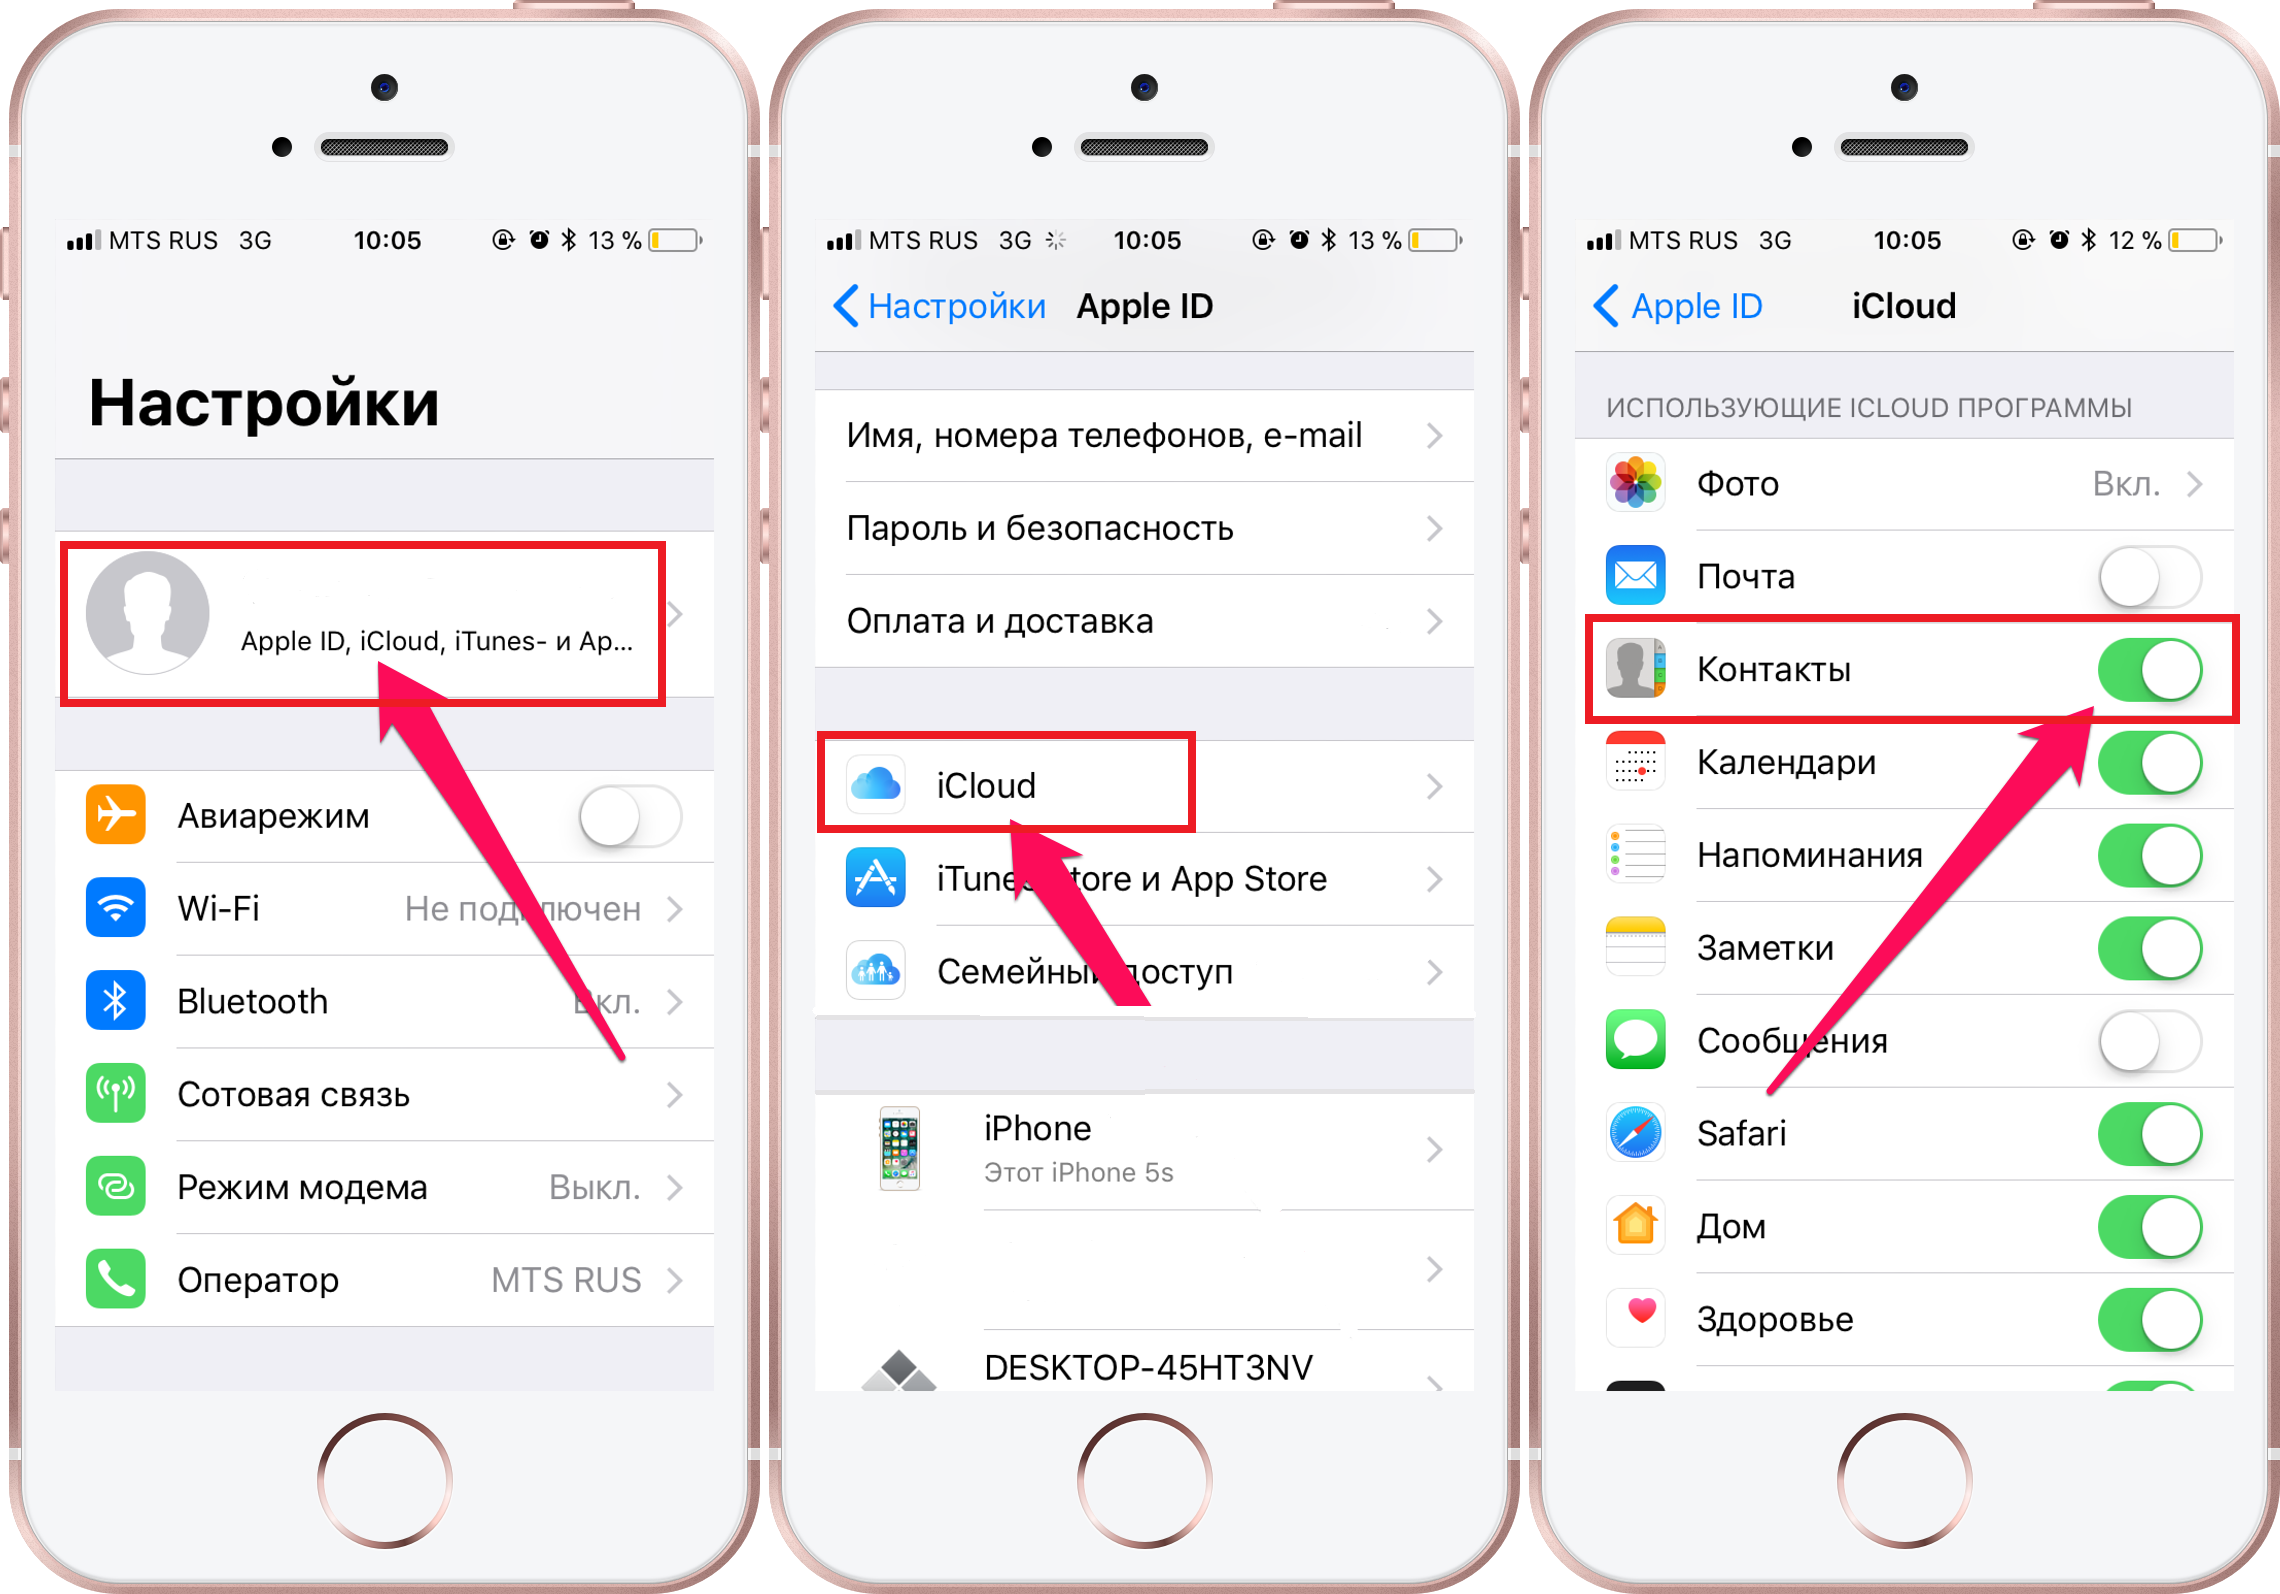 How to find a deleted contact in iPhone 